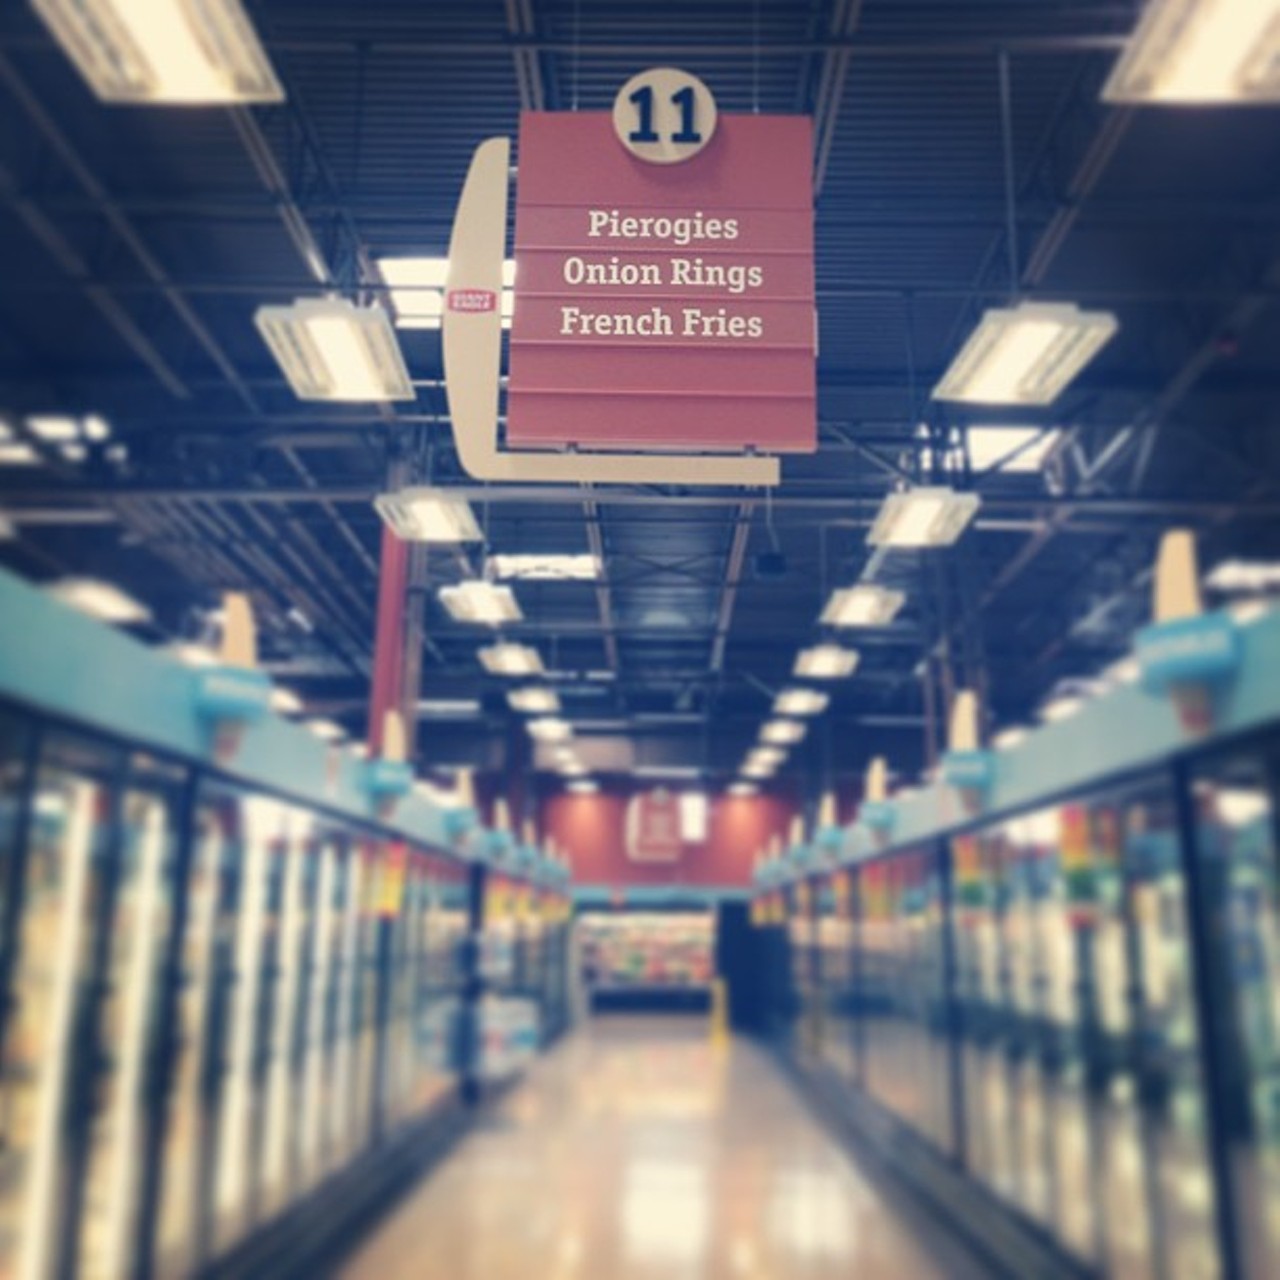 #onlyincleveland will you find a pierogi aisle.